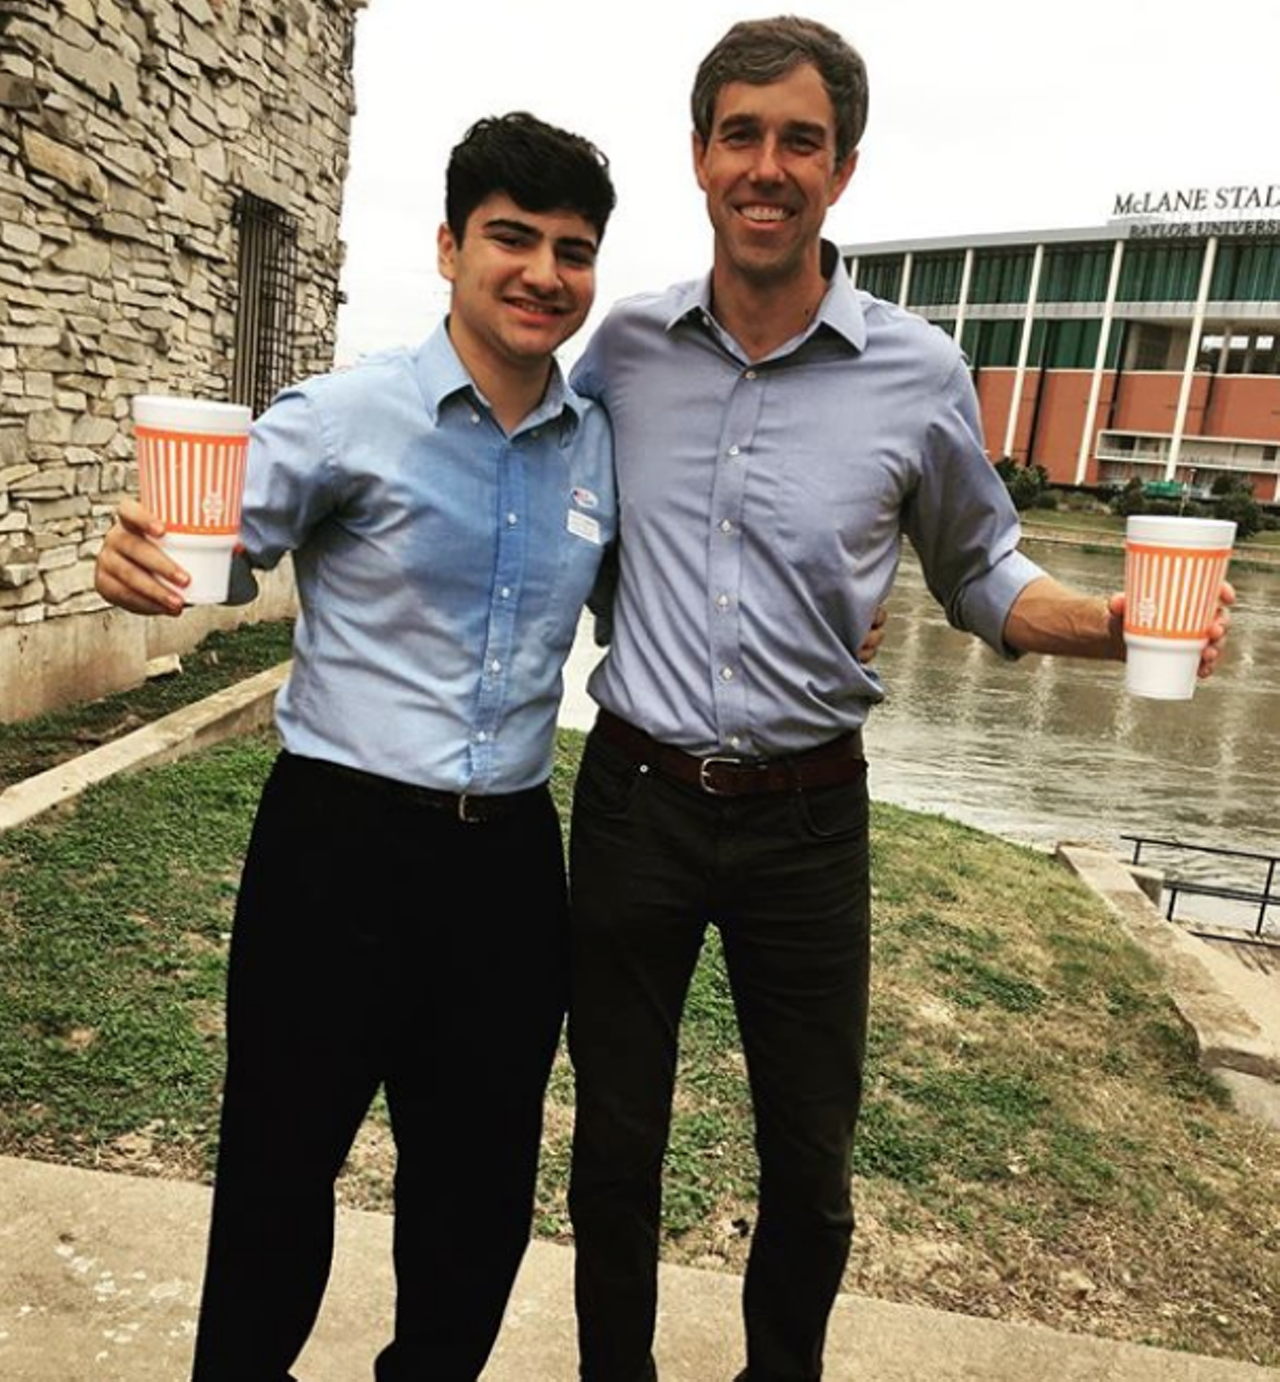 Beto O’Rourke
The general public may not be as fond of Beto as they were last year, but he’s still a recognizable guy that may get some solid feedback from folks. Sport a pale blue button-up with the sleeves rolled up, get sweaty and flash that smile. Your costume is complete.
Photo via Instagram / betoorourke